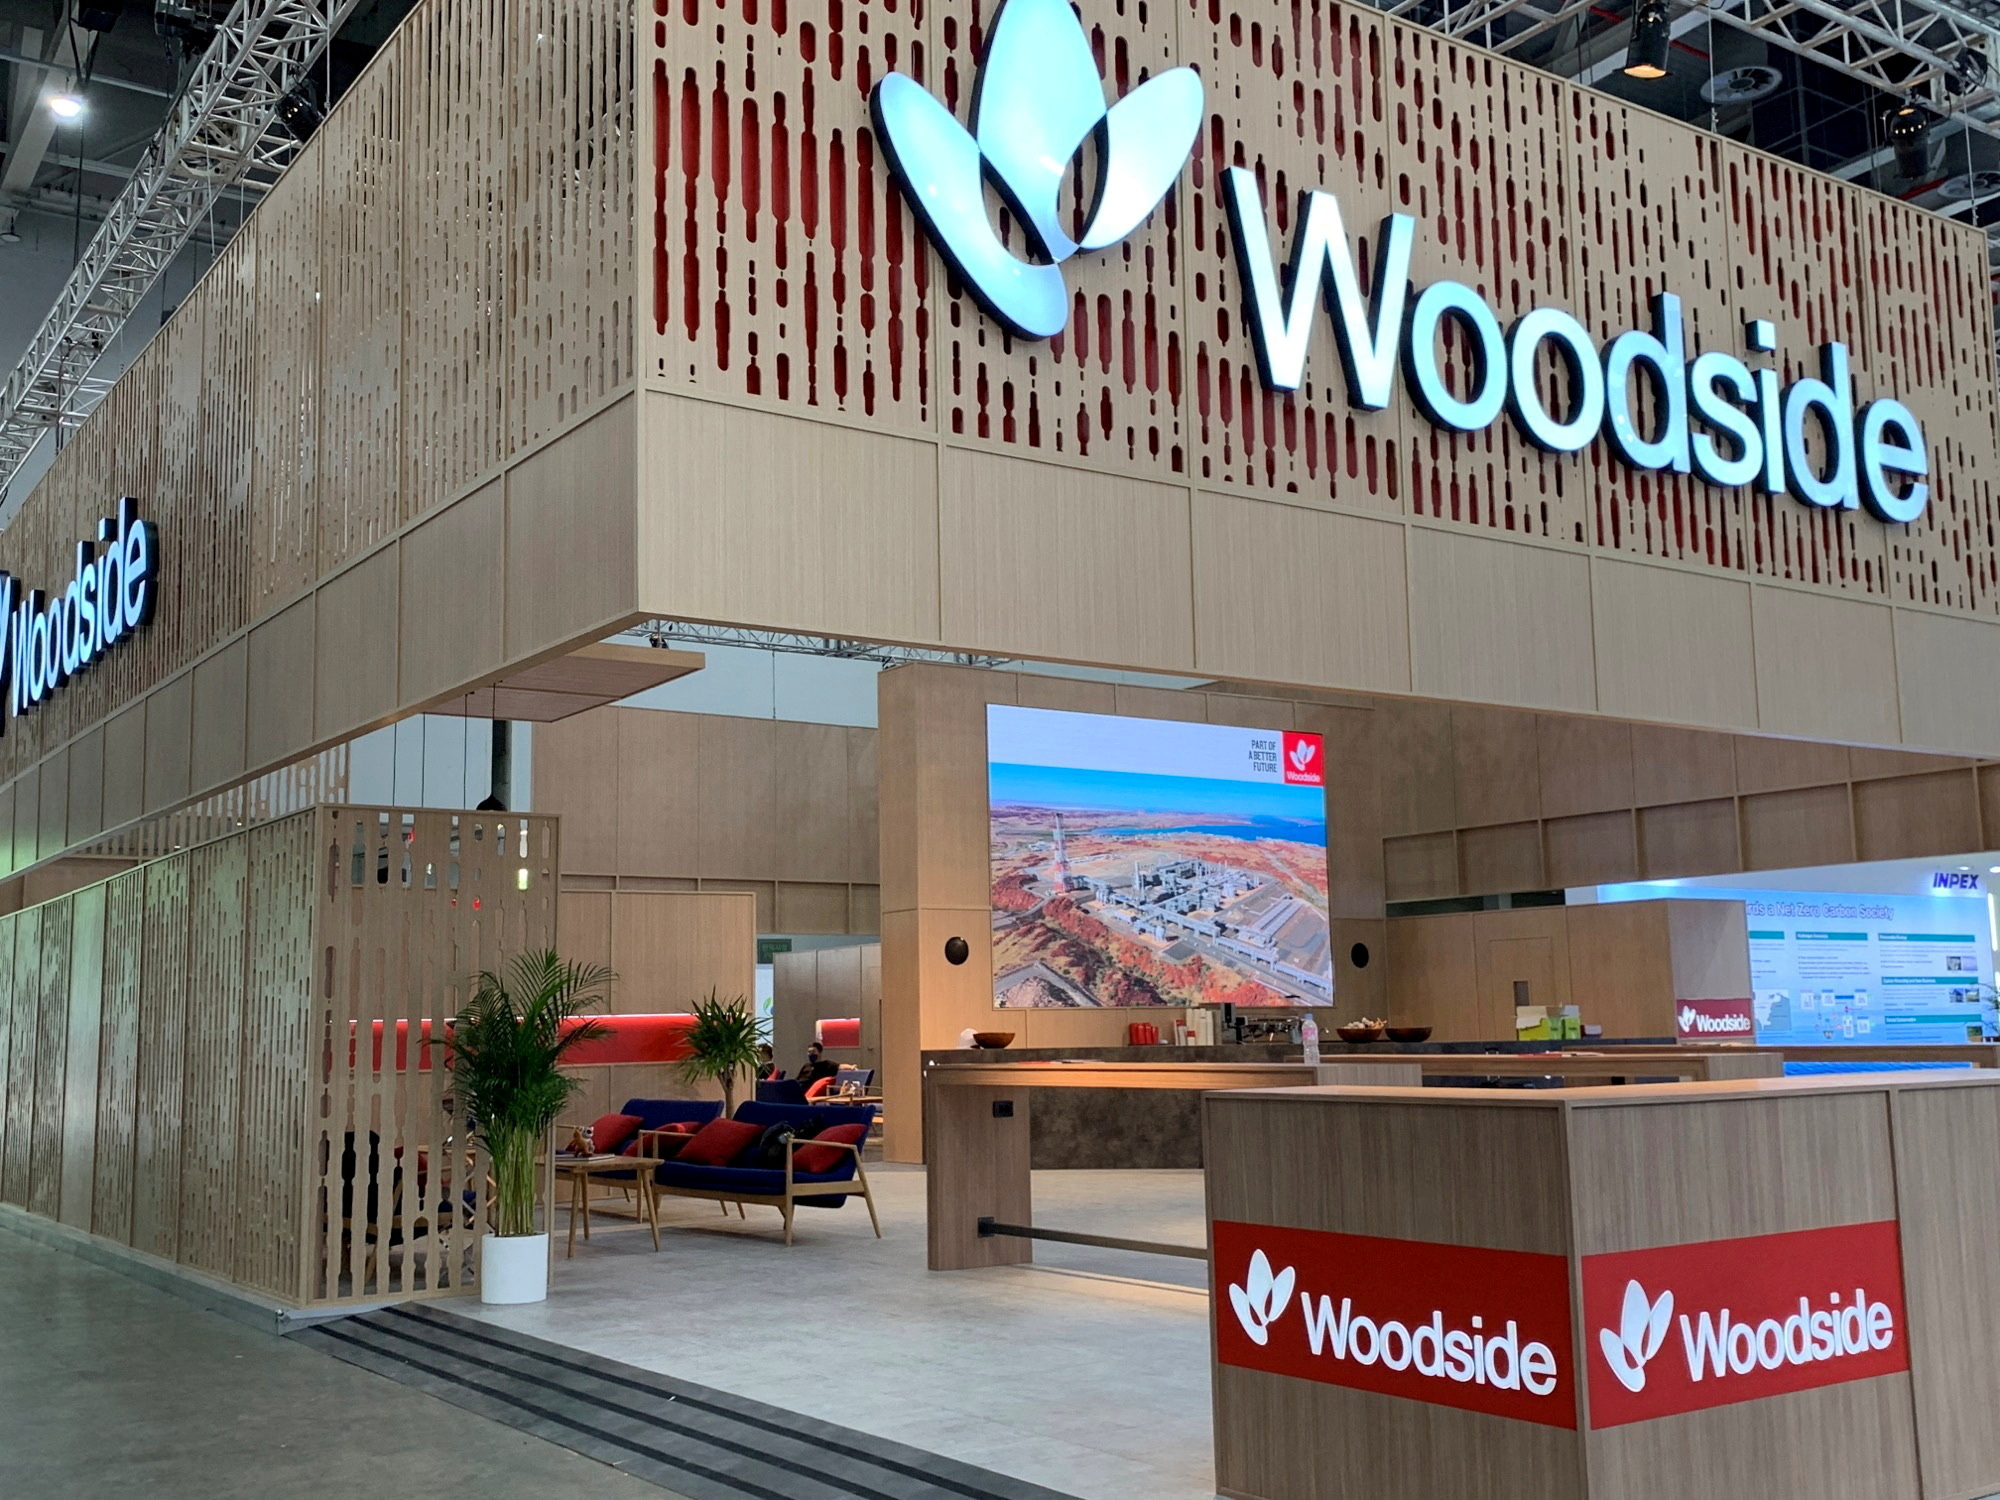 Australia's Woodside Energy Group's exhibition booth is seen at the World Gas Conference 2022 in Daegu, South Korea